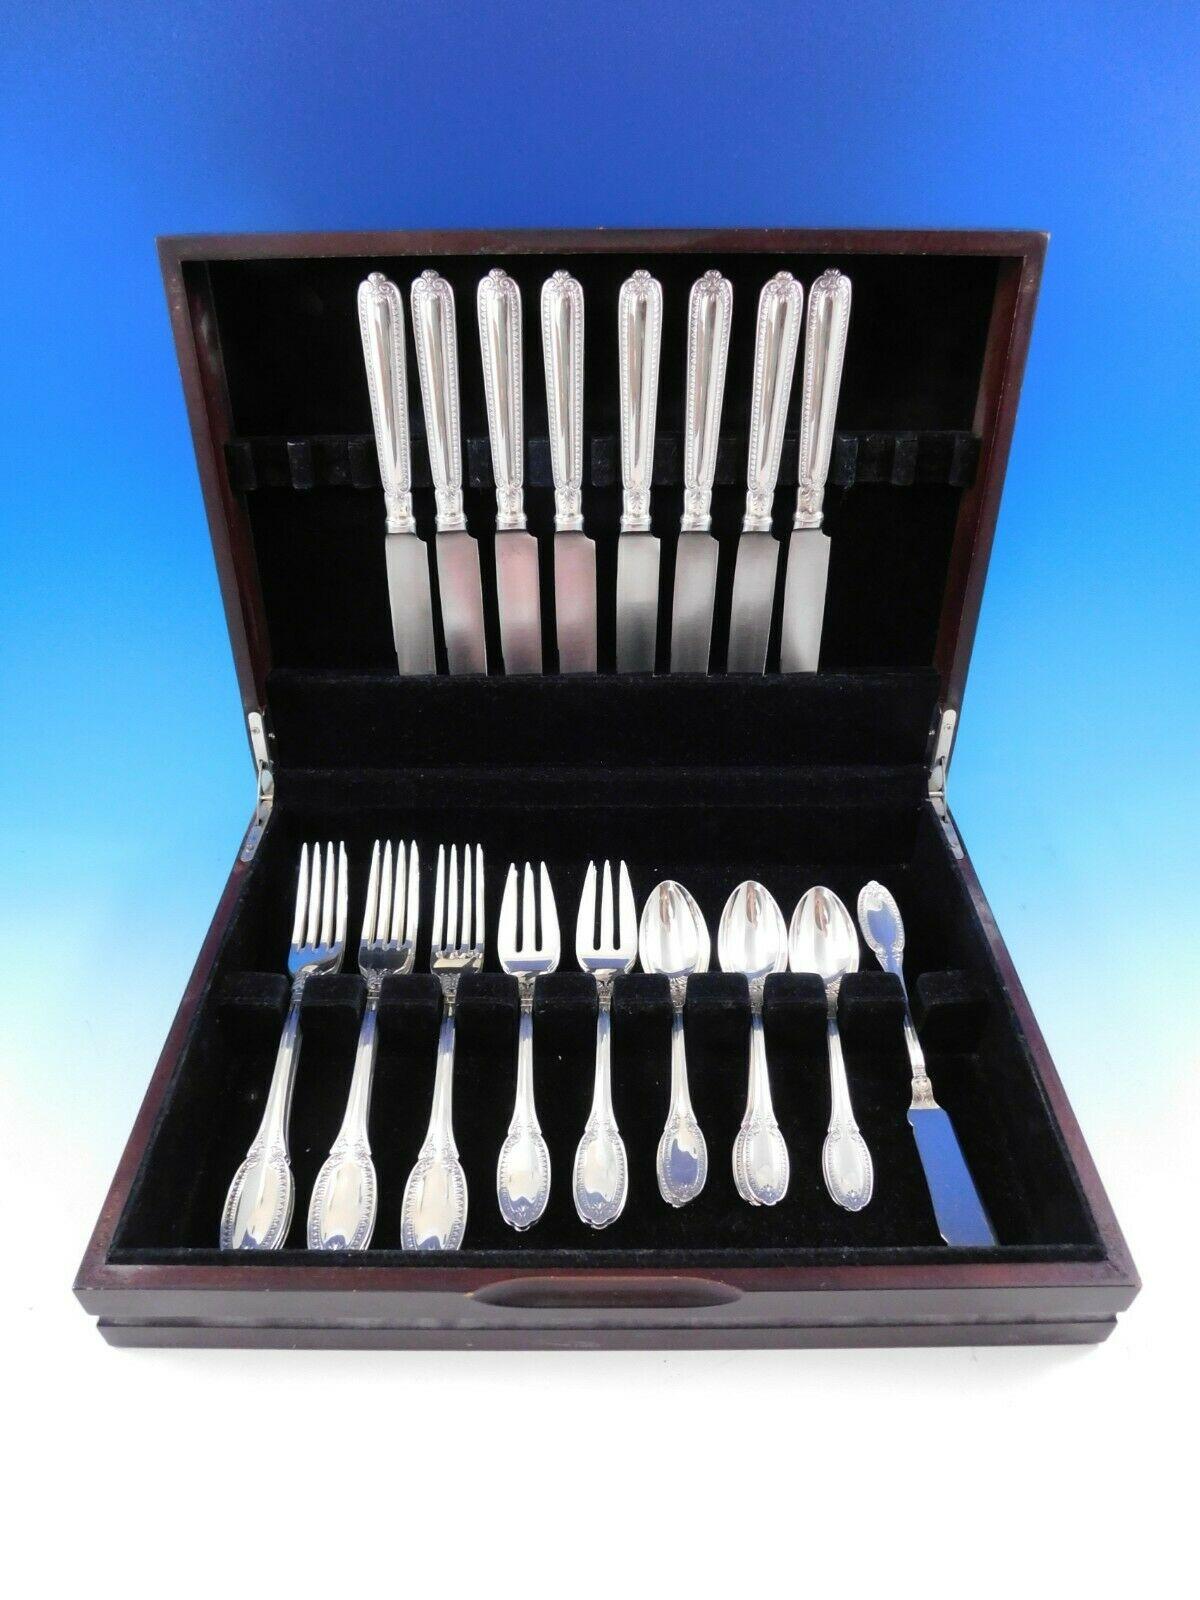 Superb dinner size Empire by Buccellati sterling silver flatware set - 33 Pieces. This set includes:

8 dinner knives, 9 7/8